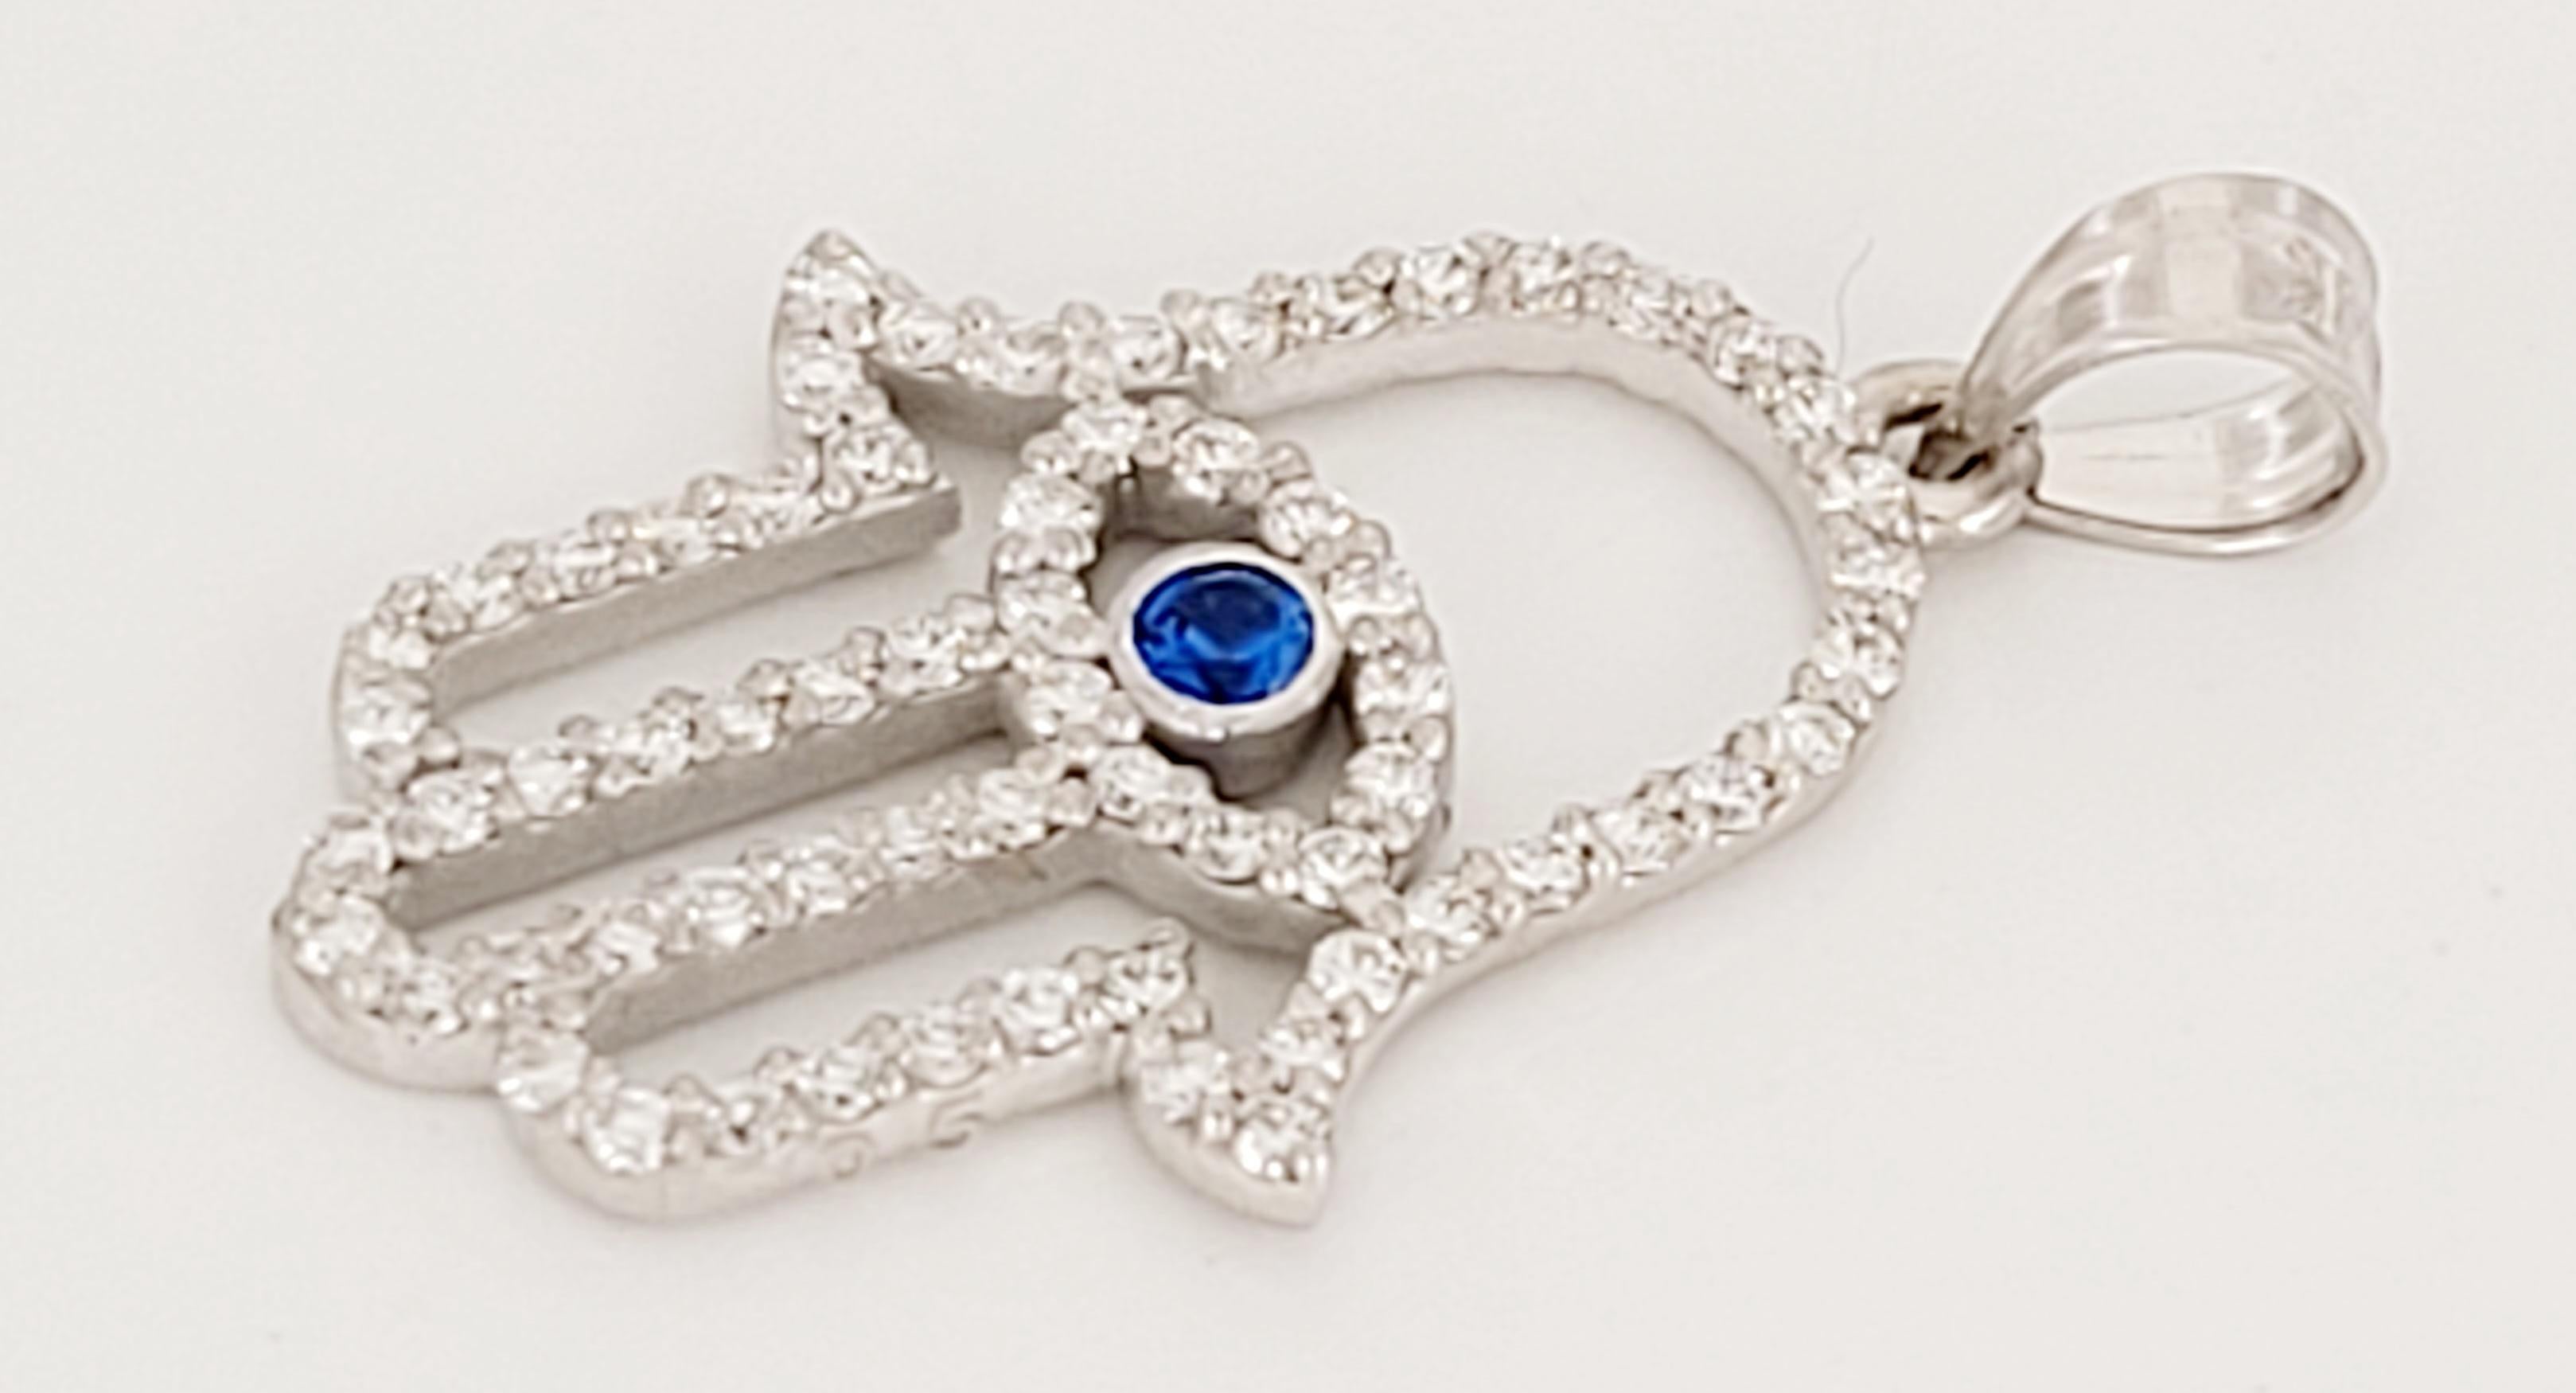 Unbranded Pendant
14K White :Gold 
Sapphire and Diamonds 
Sapphire .08ct 
Diamonds .40ct
Diamond :Clarity VS
Color Grade G
Weight 1.6gr 
Condition new, without tags
Retail Price: $1000